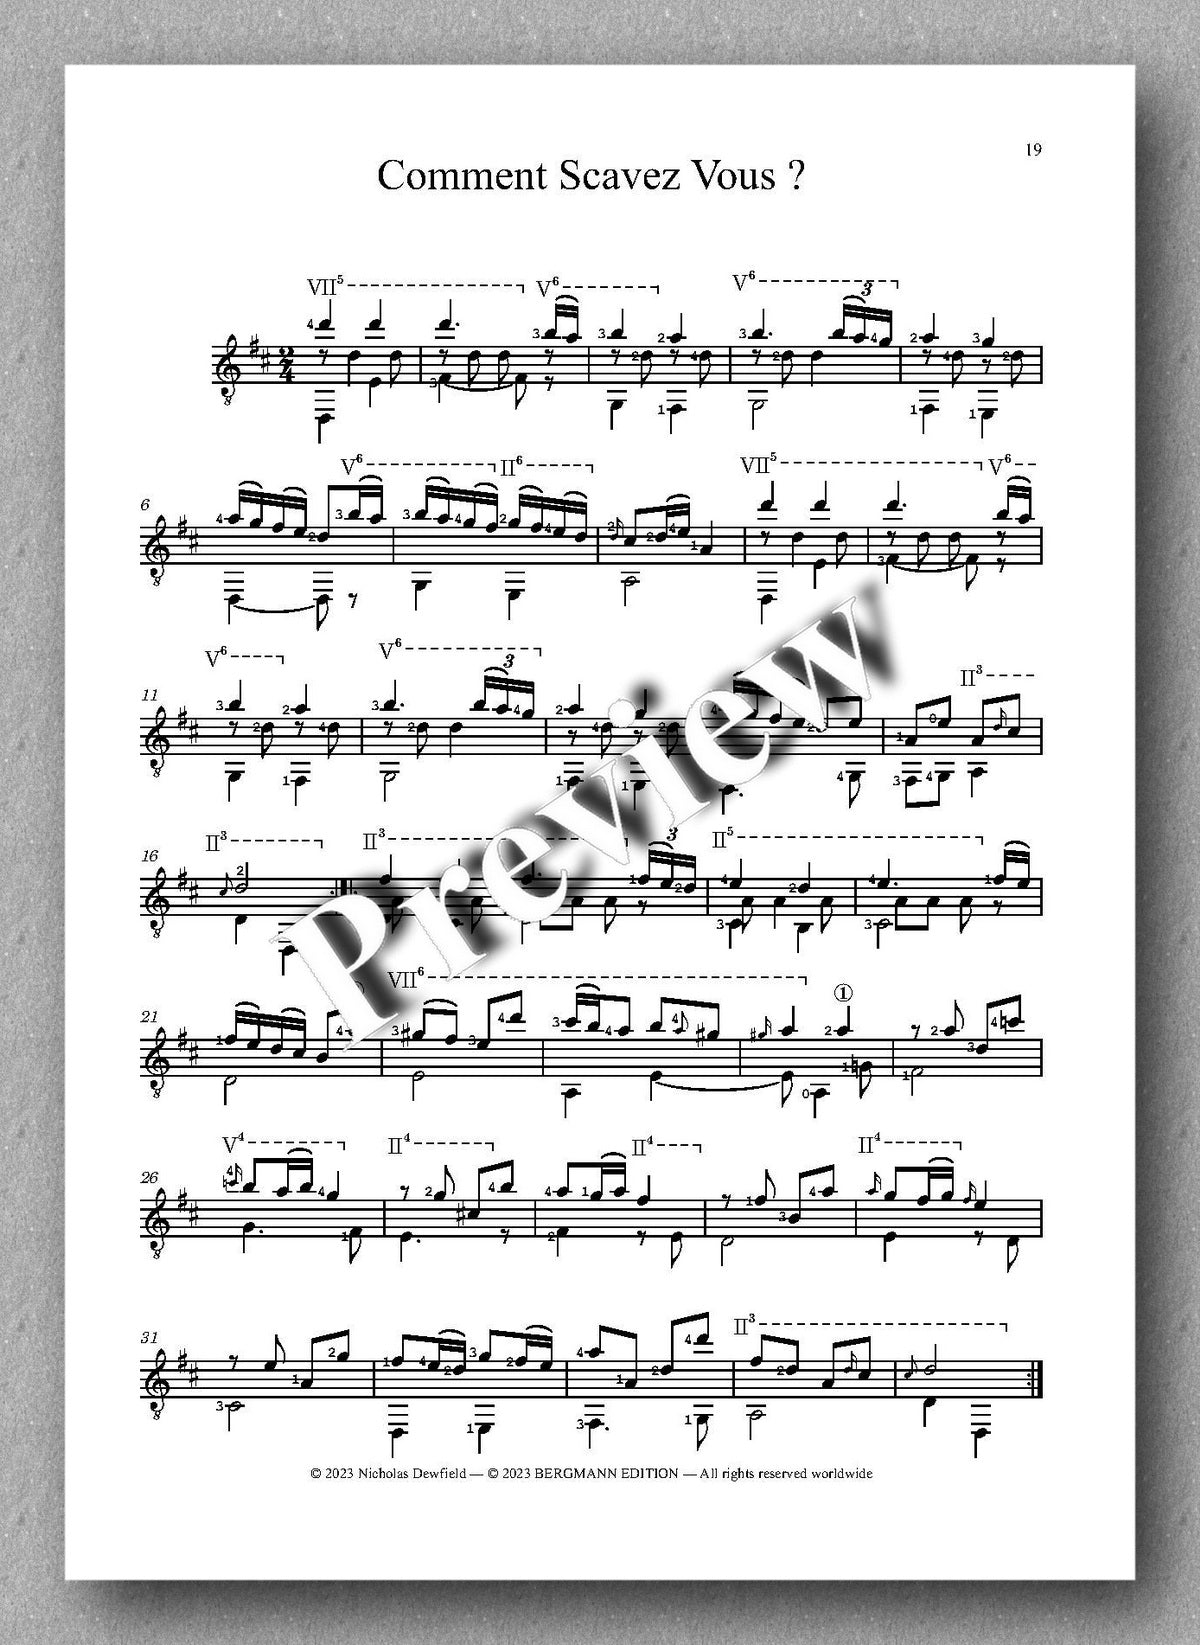 Sylvius Leopold Weiss (1687-1750), Sonata No. 26 - Preview of the music score 8